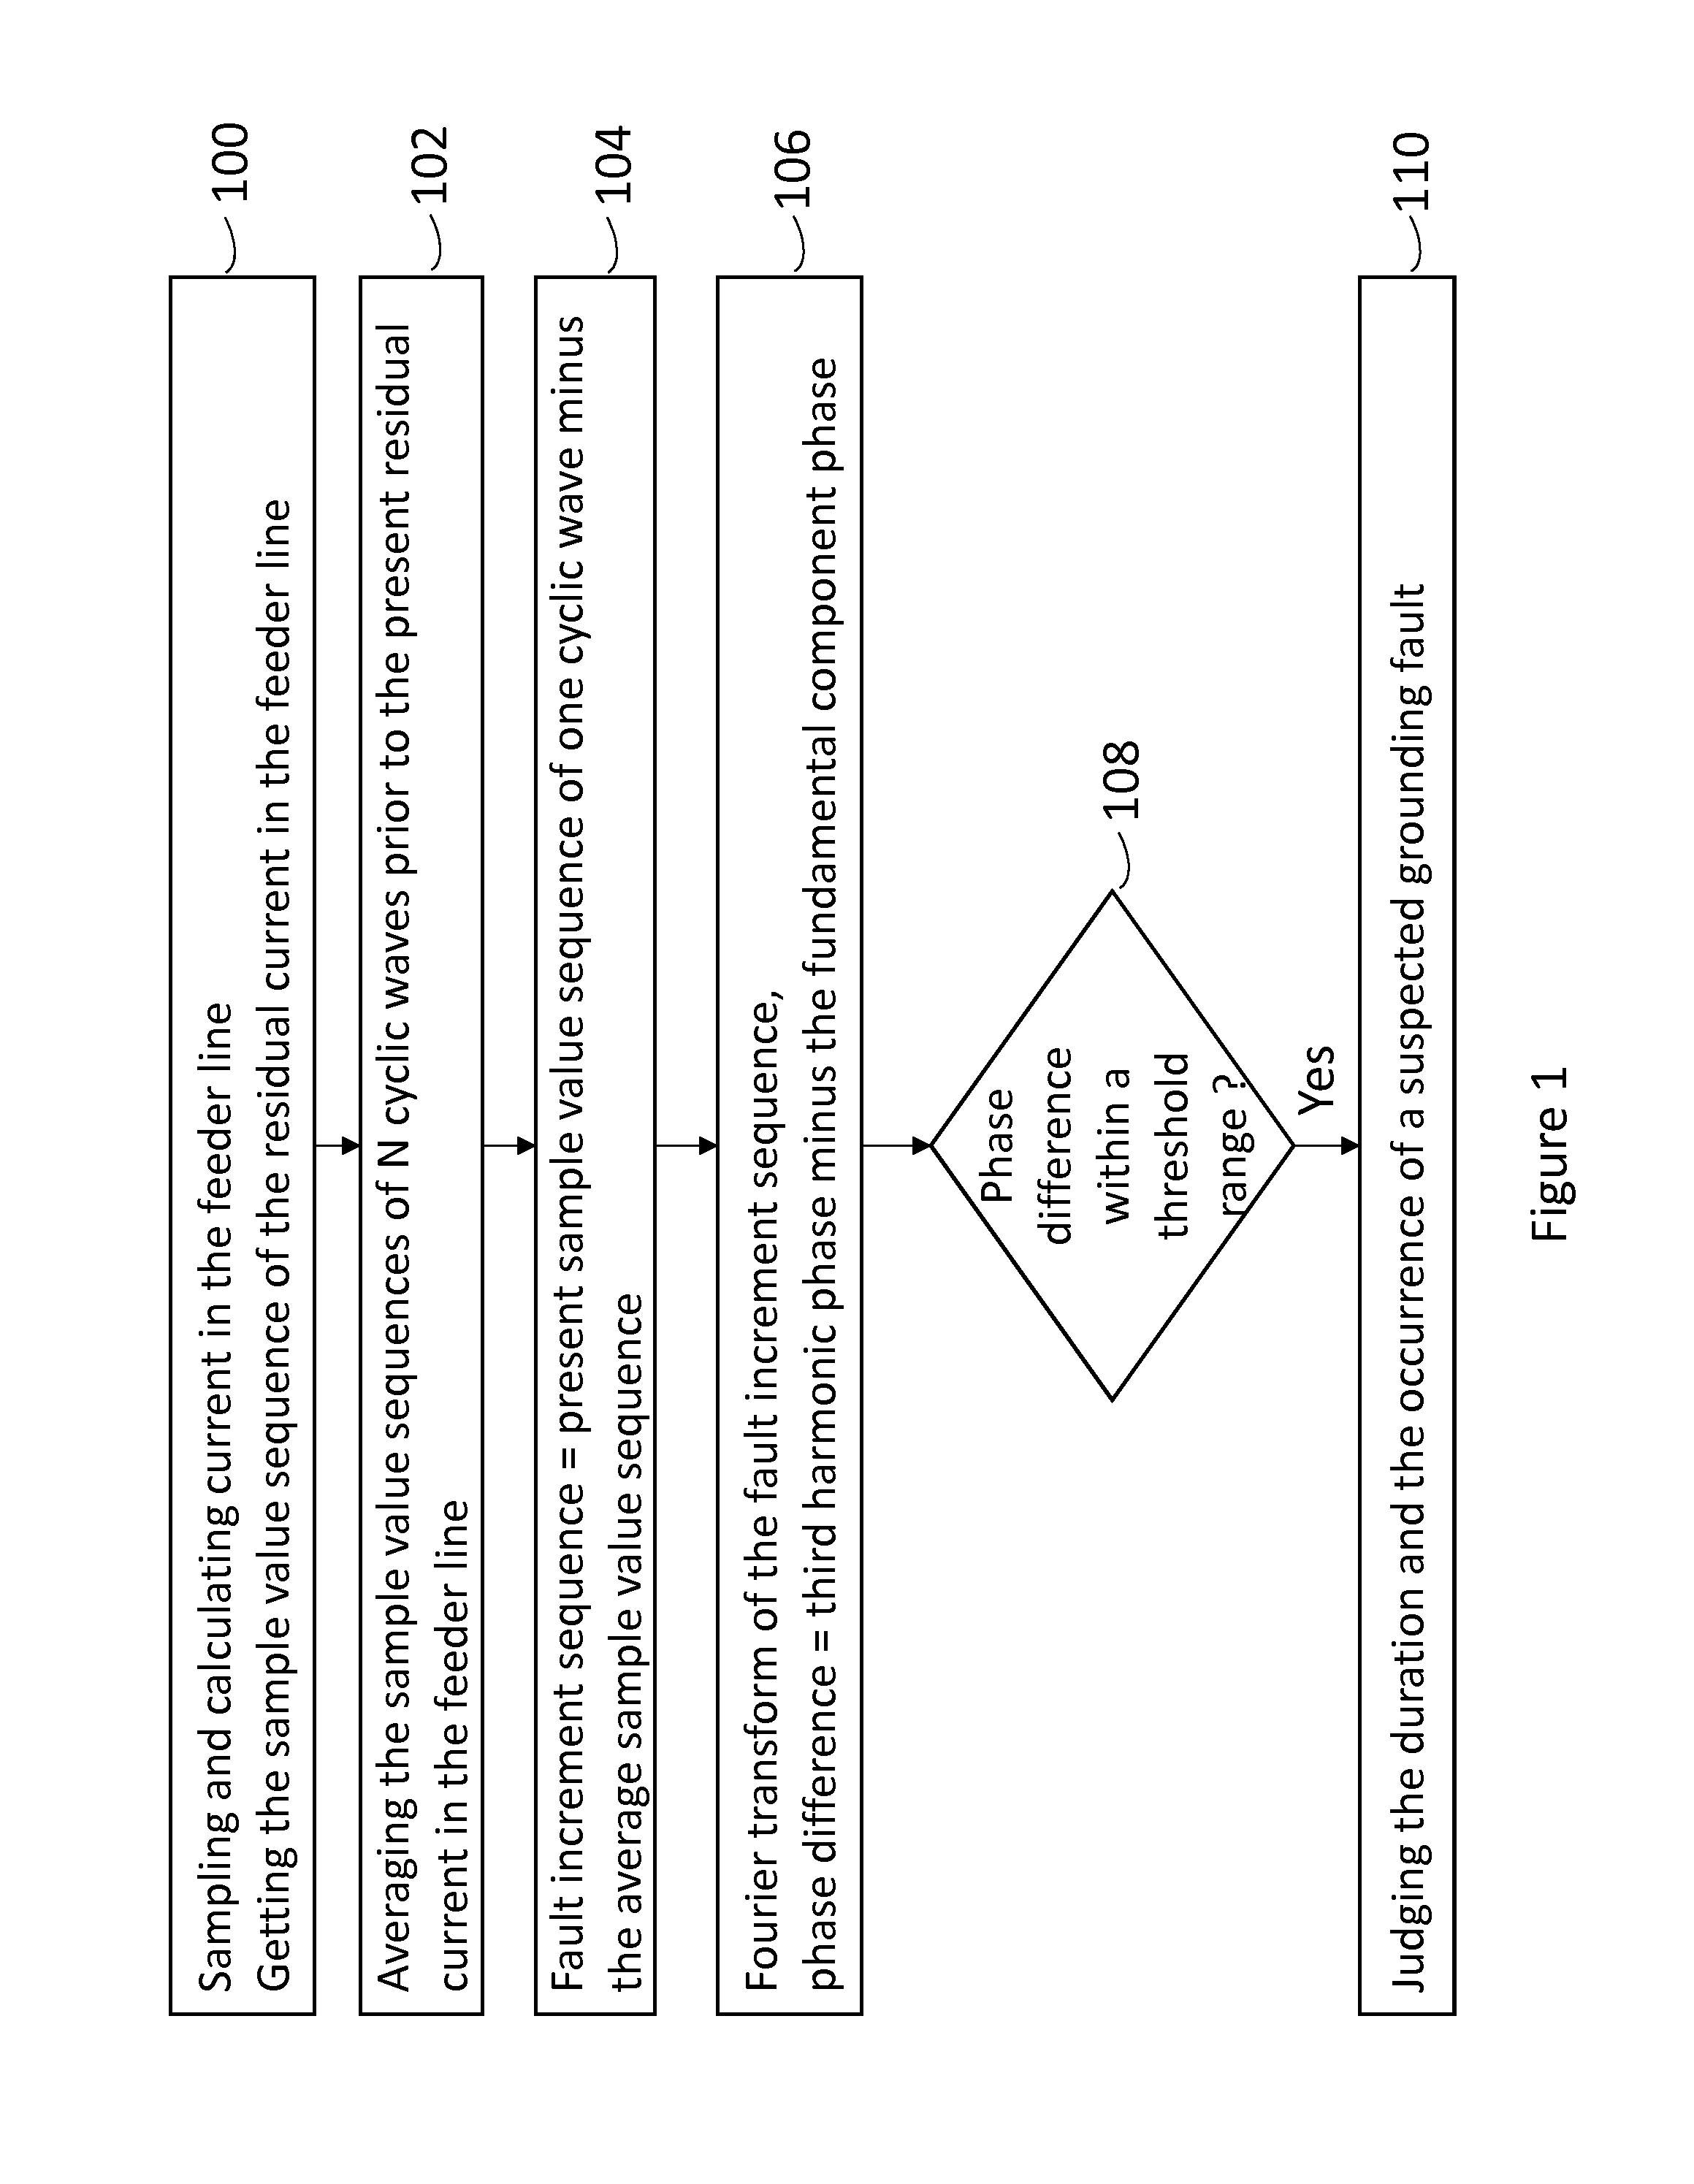 Method for detecting single phase grounding fault based on harmonic component of residual current